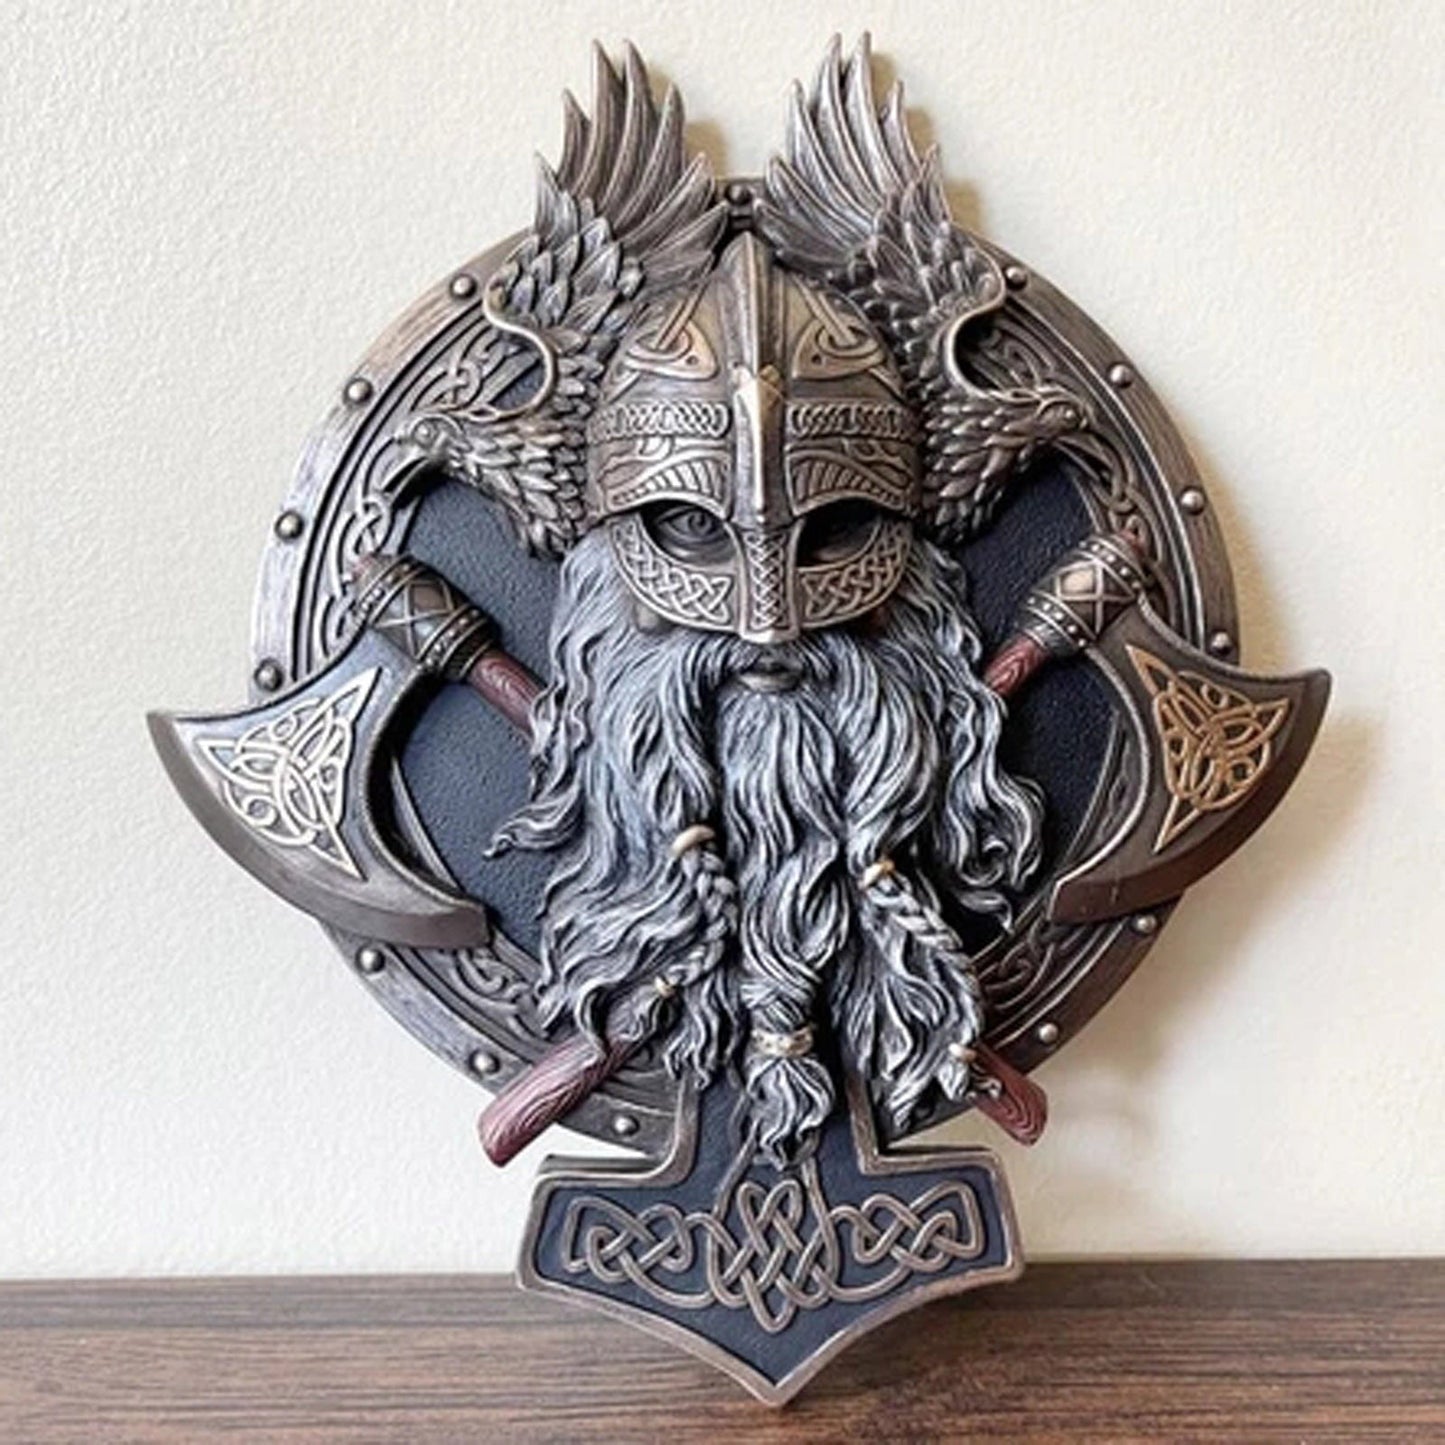 Vintage Wall Plaque Decor Double Axe Wall Decorative Plaque Powerful Norse Wall Decor Resin Ornaments Figurines Party Supplies - Home Decor Gifts and More